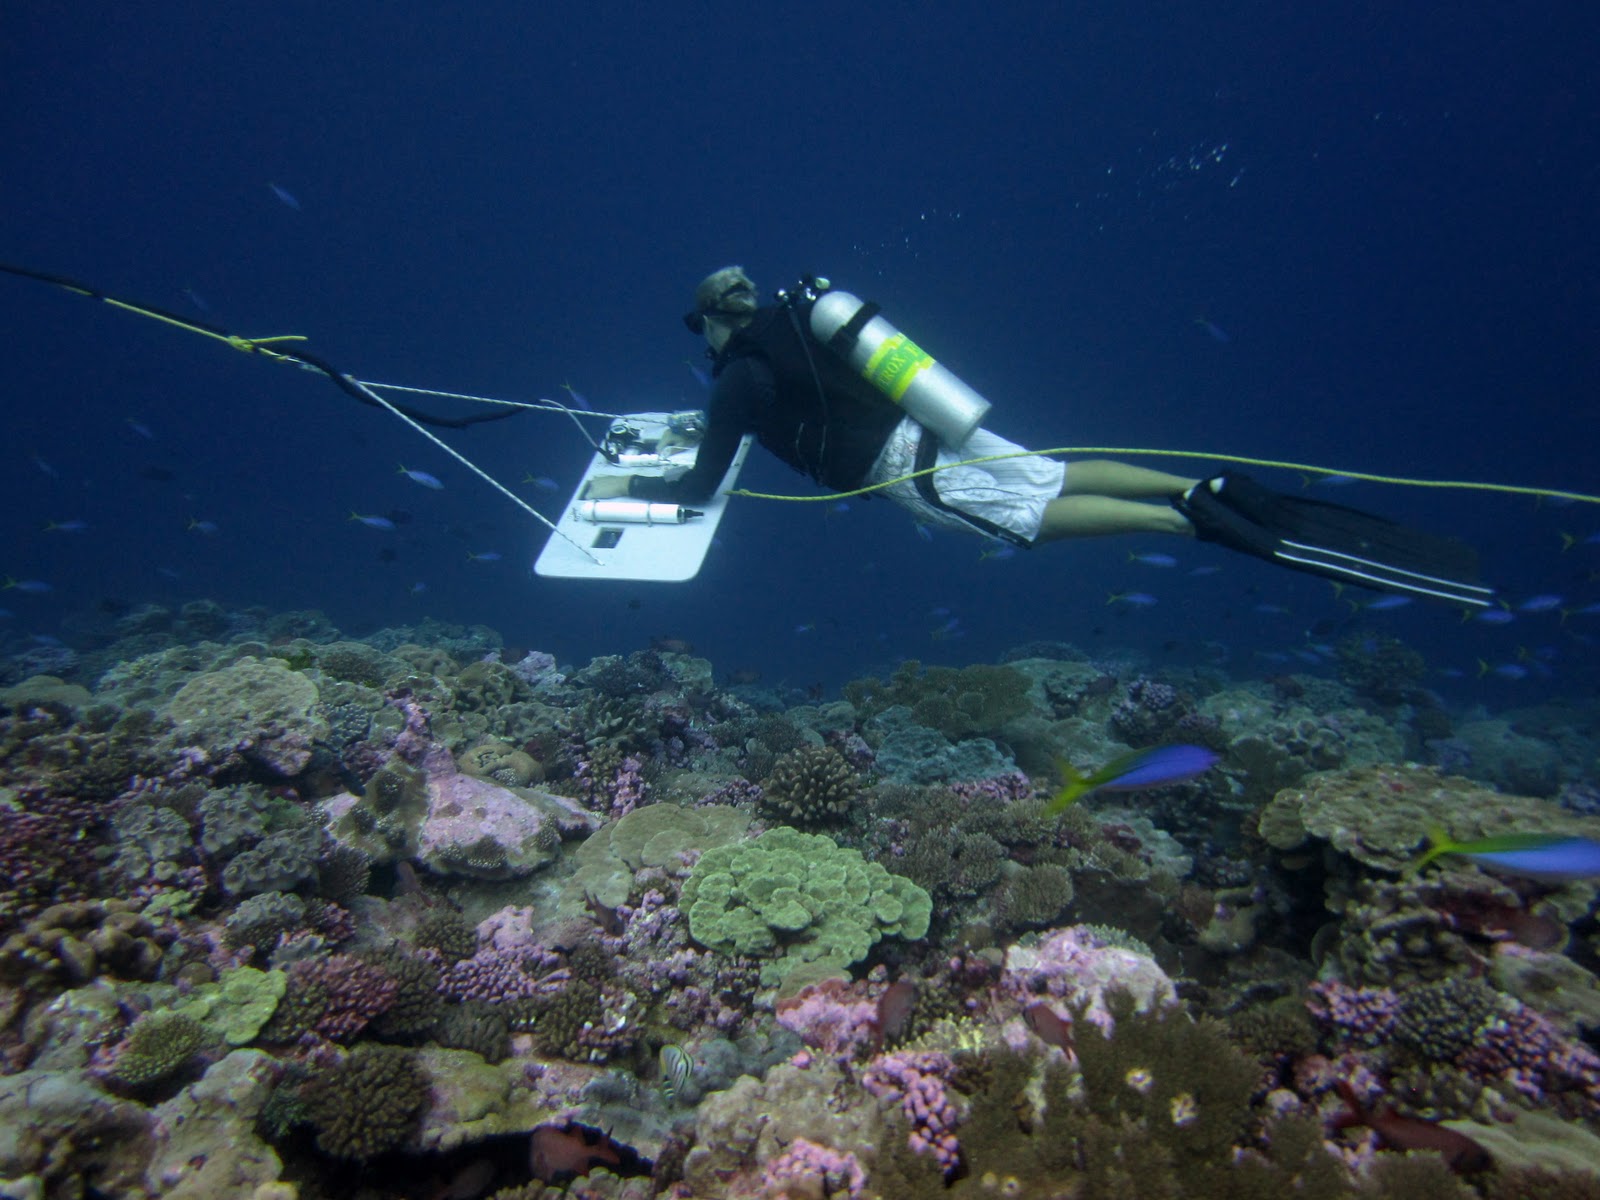 DNA Sampling Next Frontier in Fish Counts - One Fish Foundation